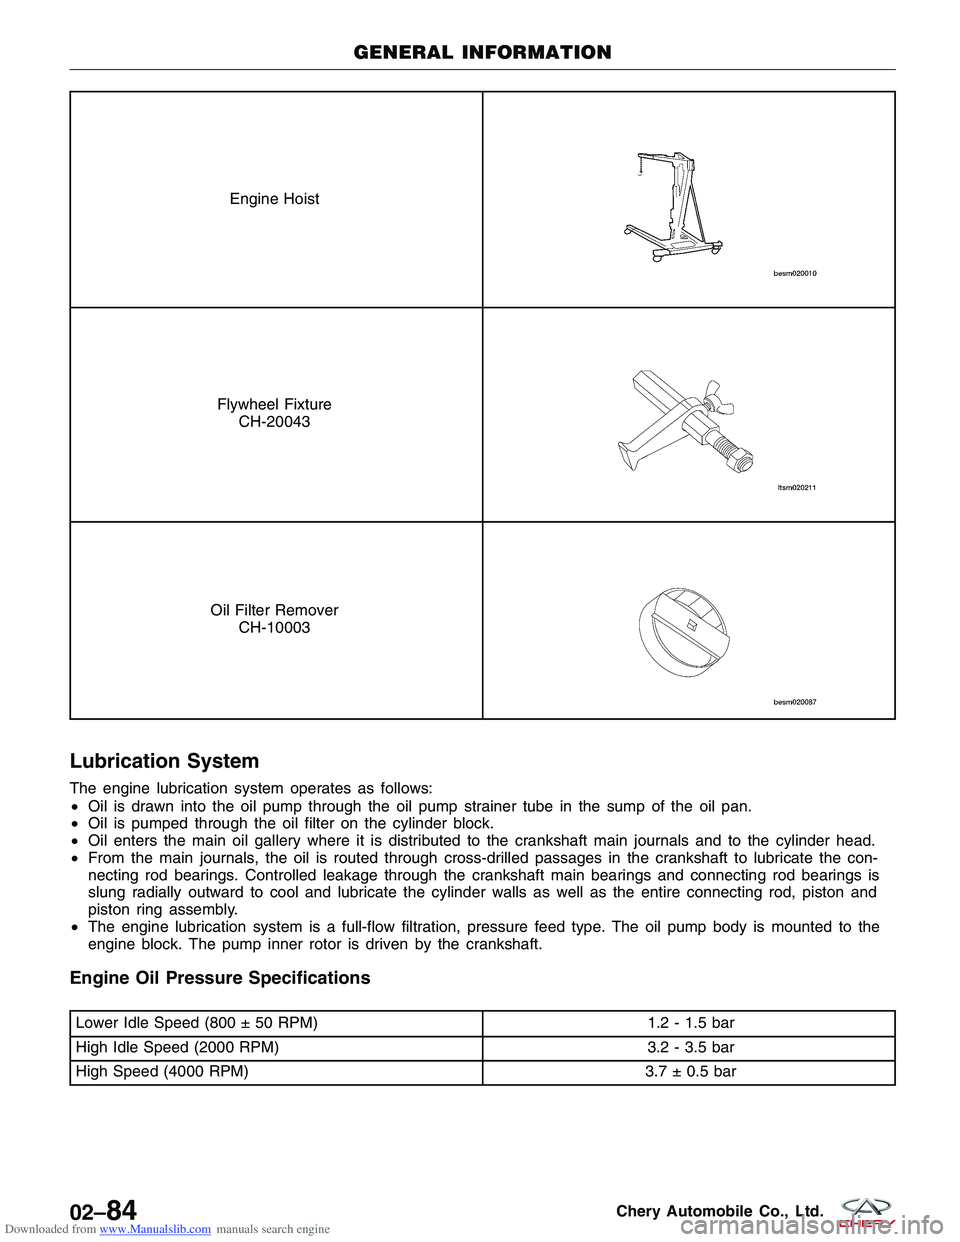 CHERY TIGGO 2009  Service User Guide Downloaded from www.Manualslib.com manuals search engine Engine Hoist
Flywheel FixtureCH-20043
Oil Filter Remover CH-10003
Lubrication System
The engine lubrication system operates as follows:
•Oil 